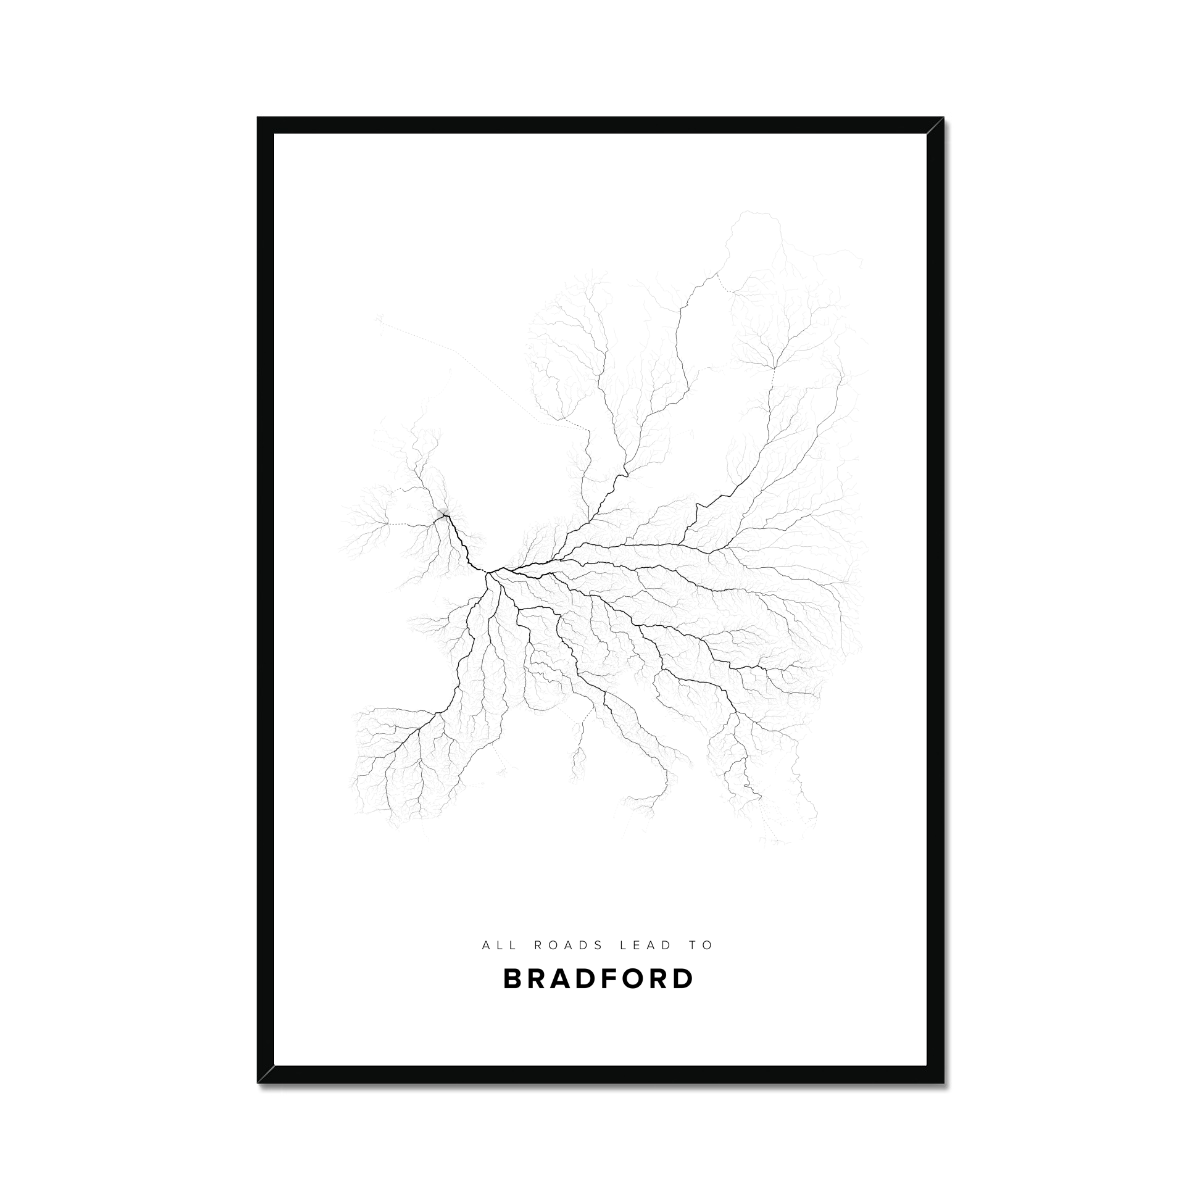 All roads lead to Bradford (United Kingdom of Great Britain and Northern Ireland) Fine Art Map Print